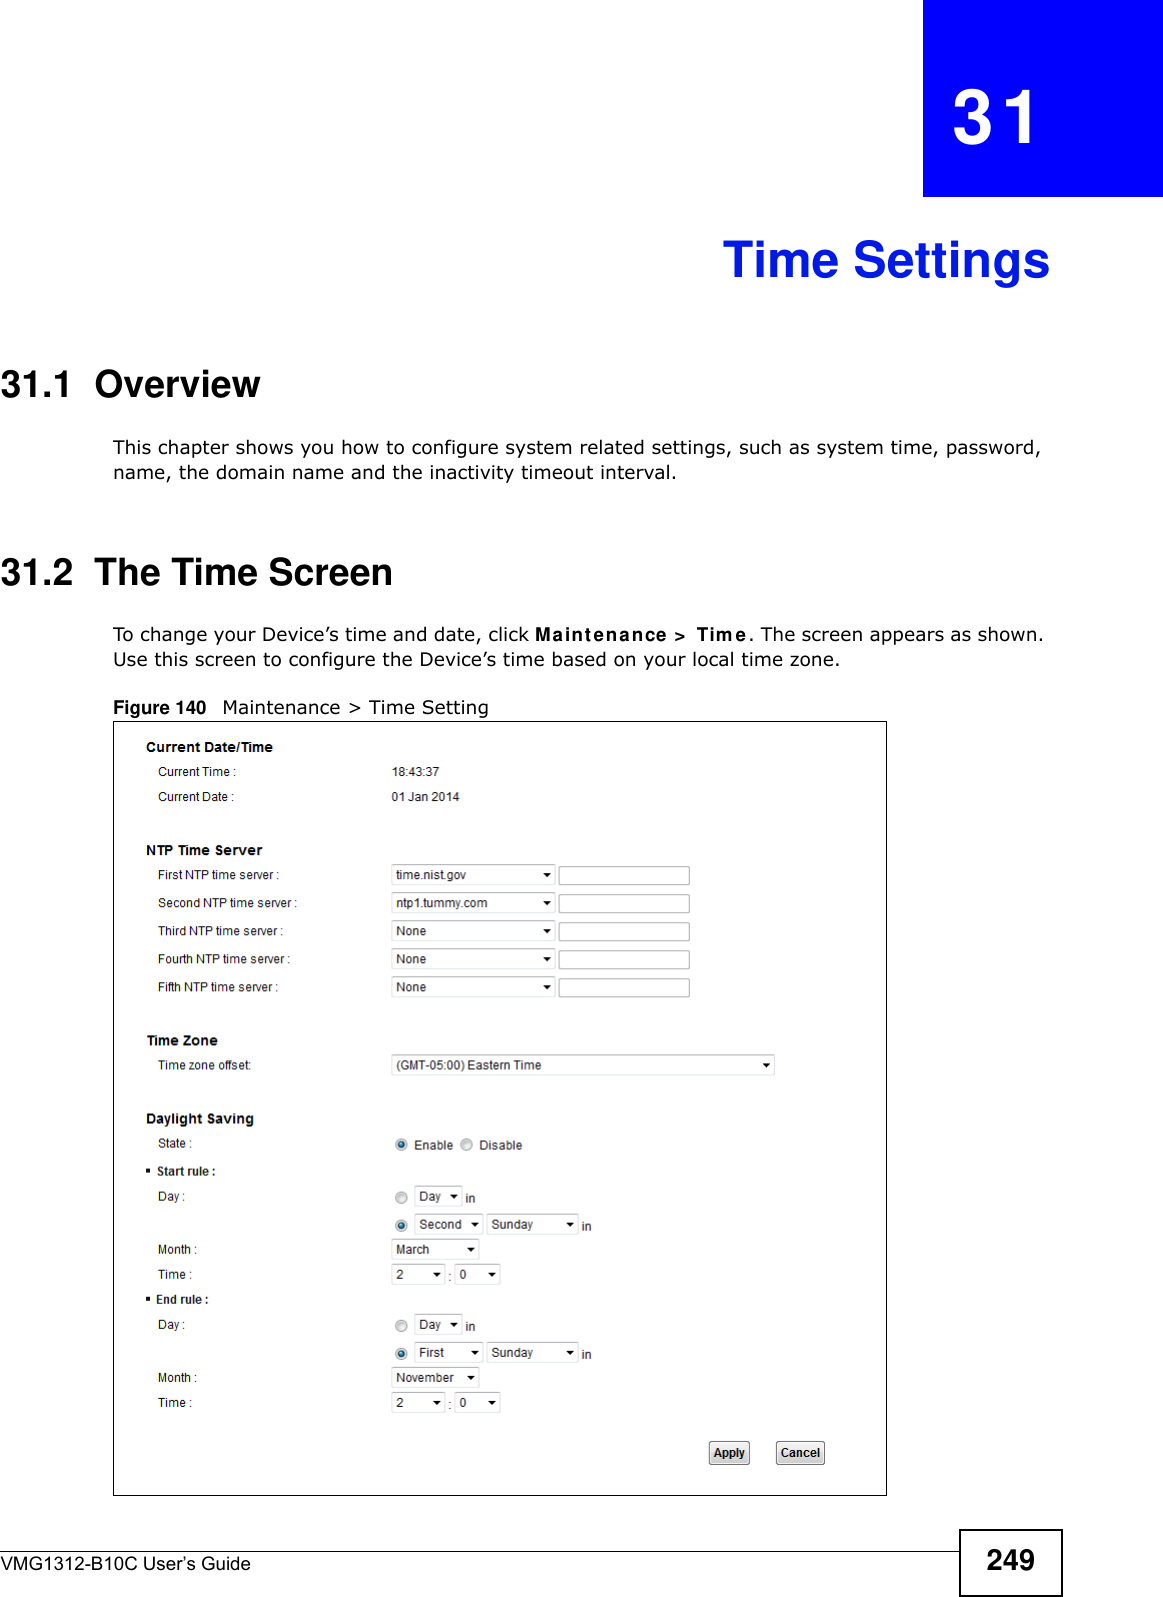 VMG1312-B10C User’s Guide 249CHAPTER   31Time Settings31.1  OverviewThis chapter shows you how to configure system related settings, such as system time, password, name, the domain name and the inactivity timeout interval.    31.2  The Time Screen To change your Device’s time and date, click Maint enance &gt;  Tim e. The screen appears as shown. Use this screen to configure the Device’s time based on your local time zone.Figure 140   Maintenance &gt; Time Setting